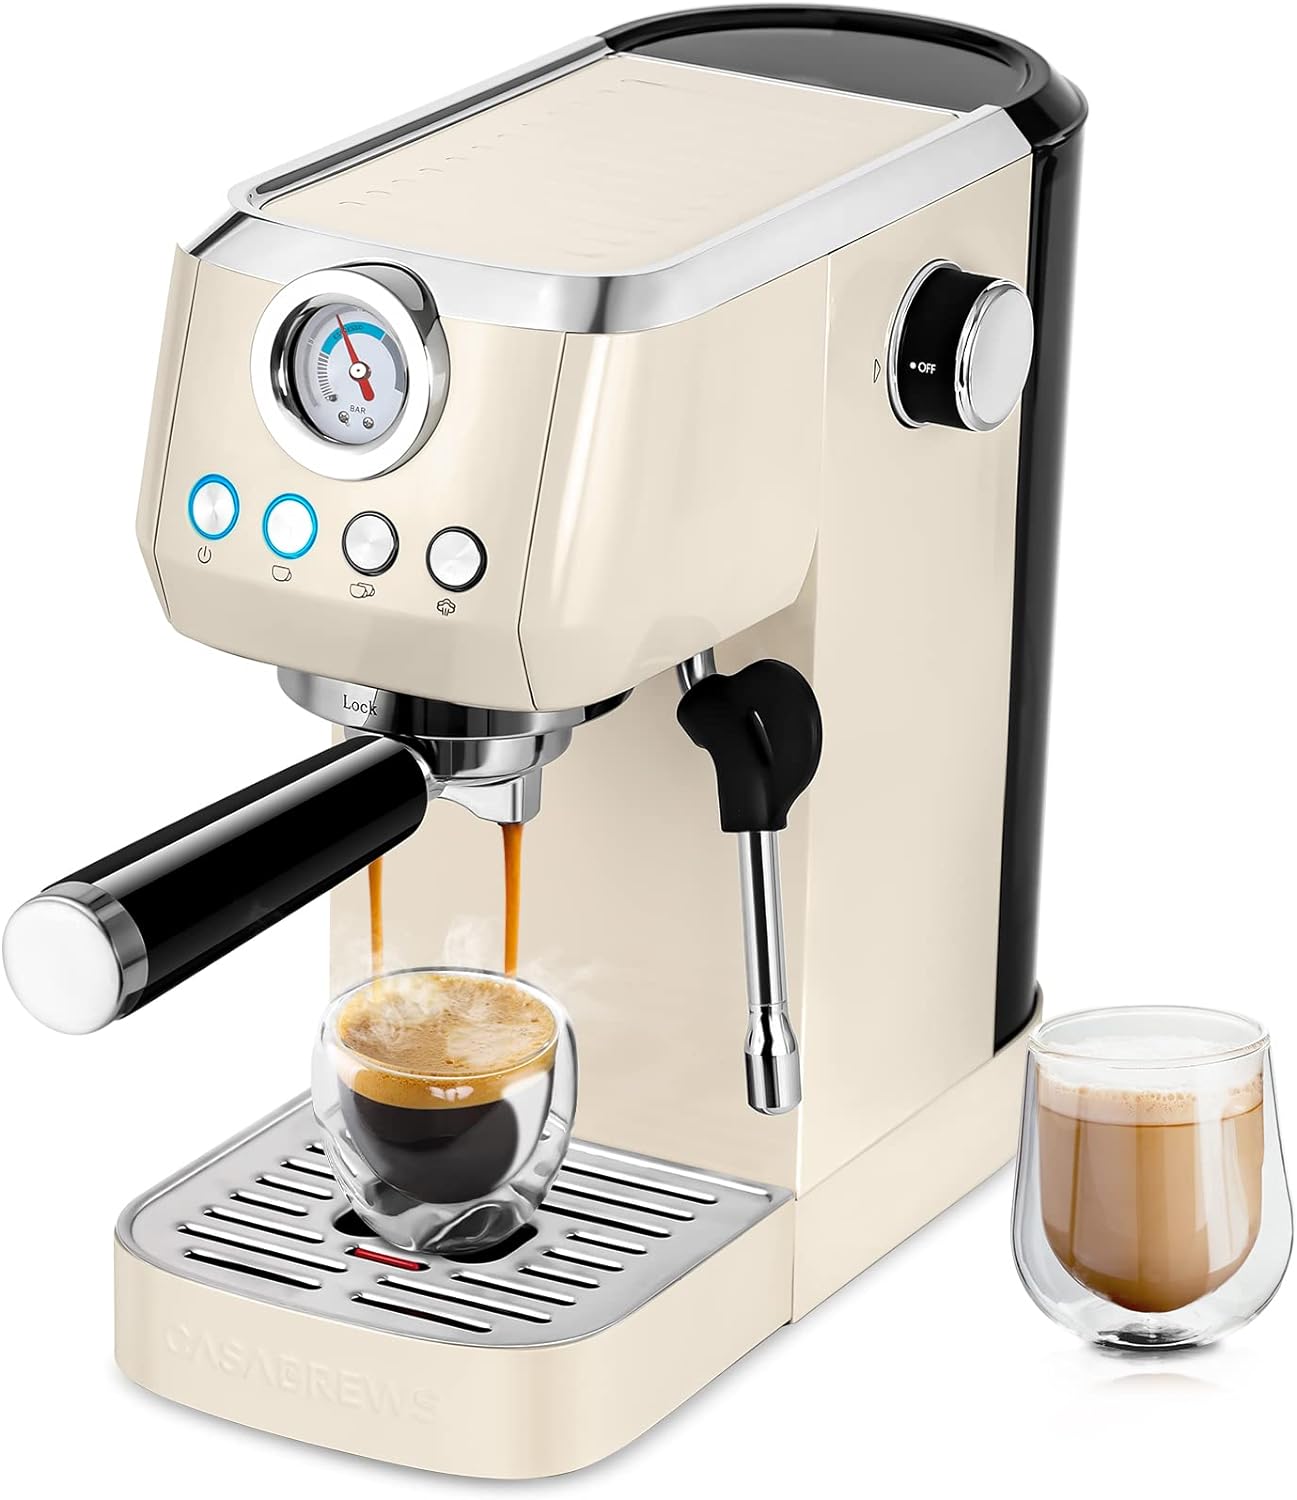 CASABREWS Espresso Machine 20 Bar, Compact Espresso Maker With Milk Frother Steam Wand, Stainless Steel Cappuccino Machine and Latte Machine With 43.9 oz Removable Water Tank for Home Barista, Creamy